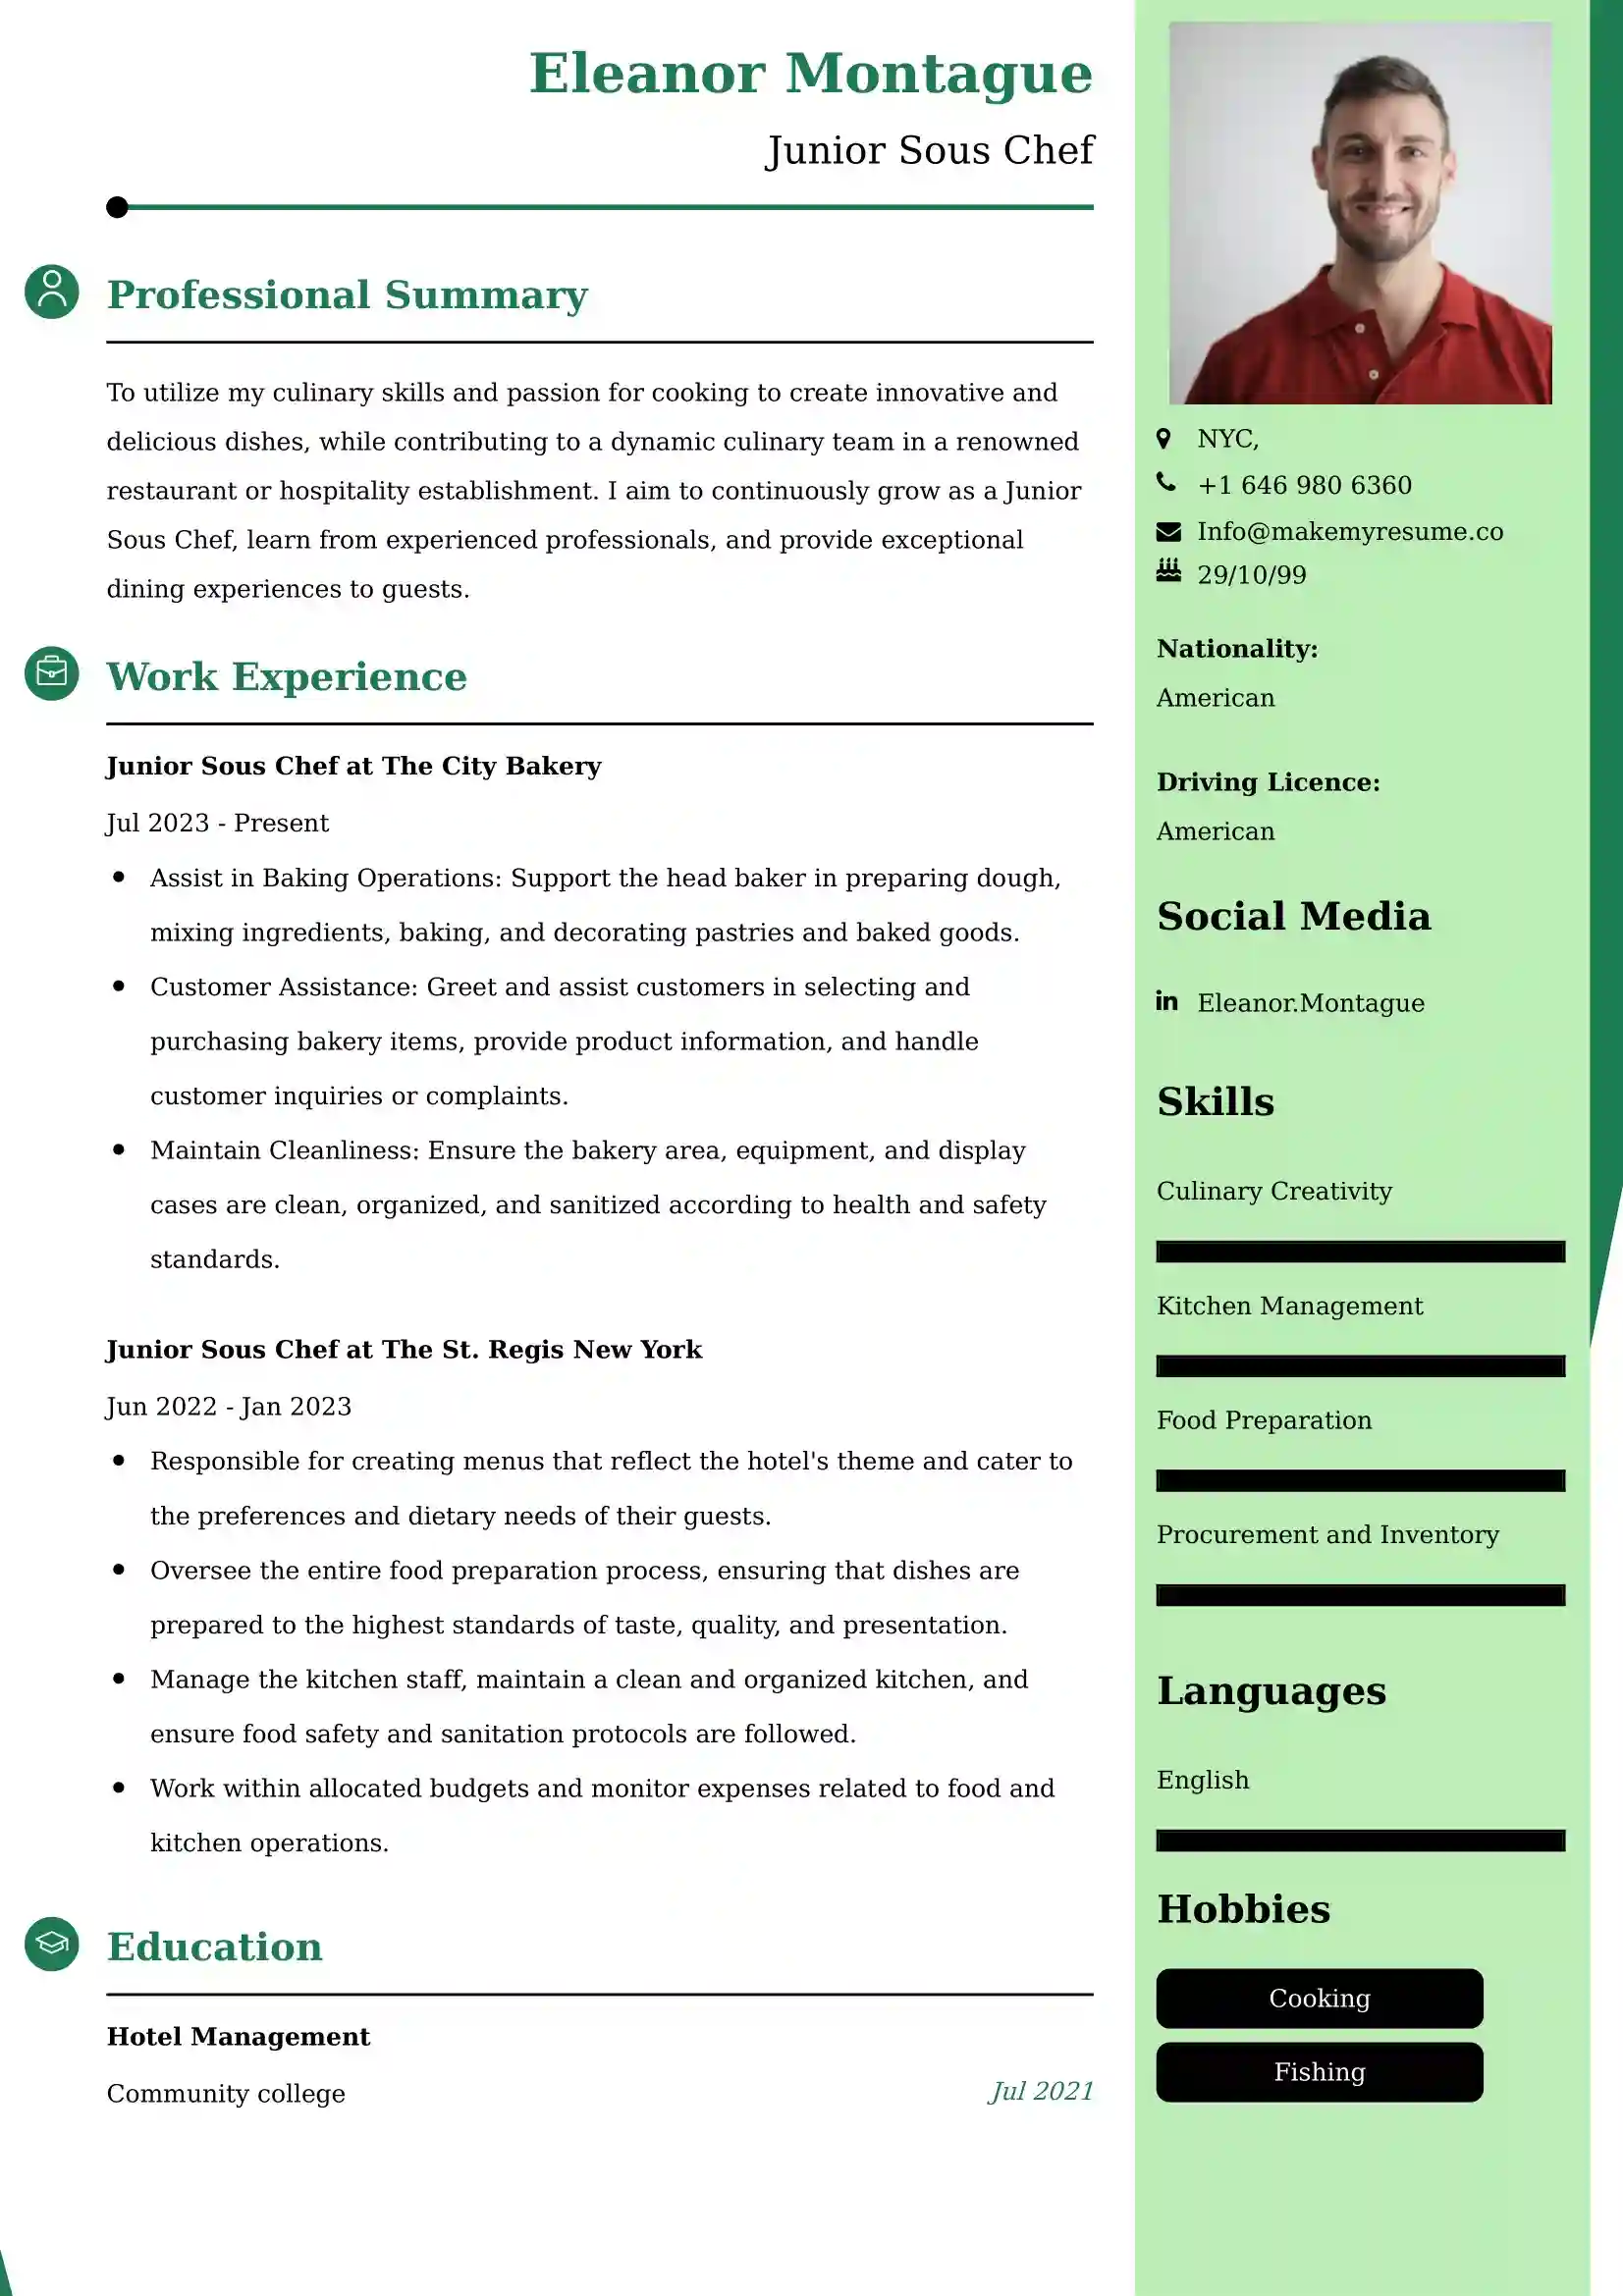 Junior Sous Chef Resume Examples - Brazilian Format, Latest Template